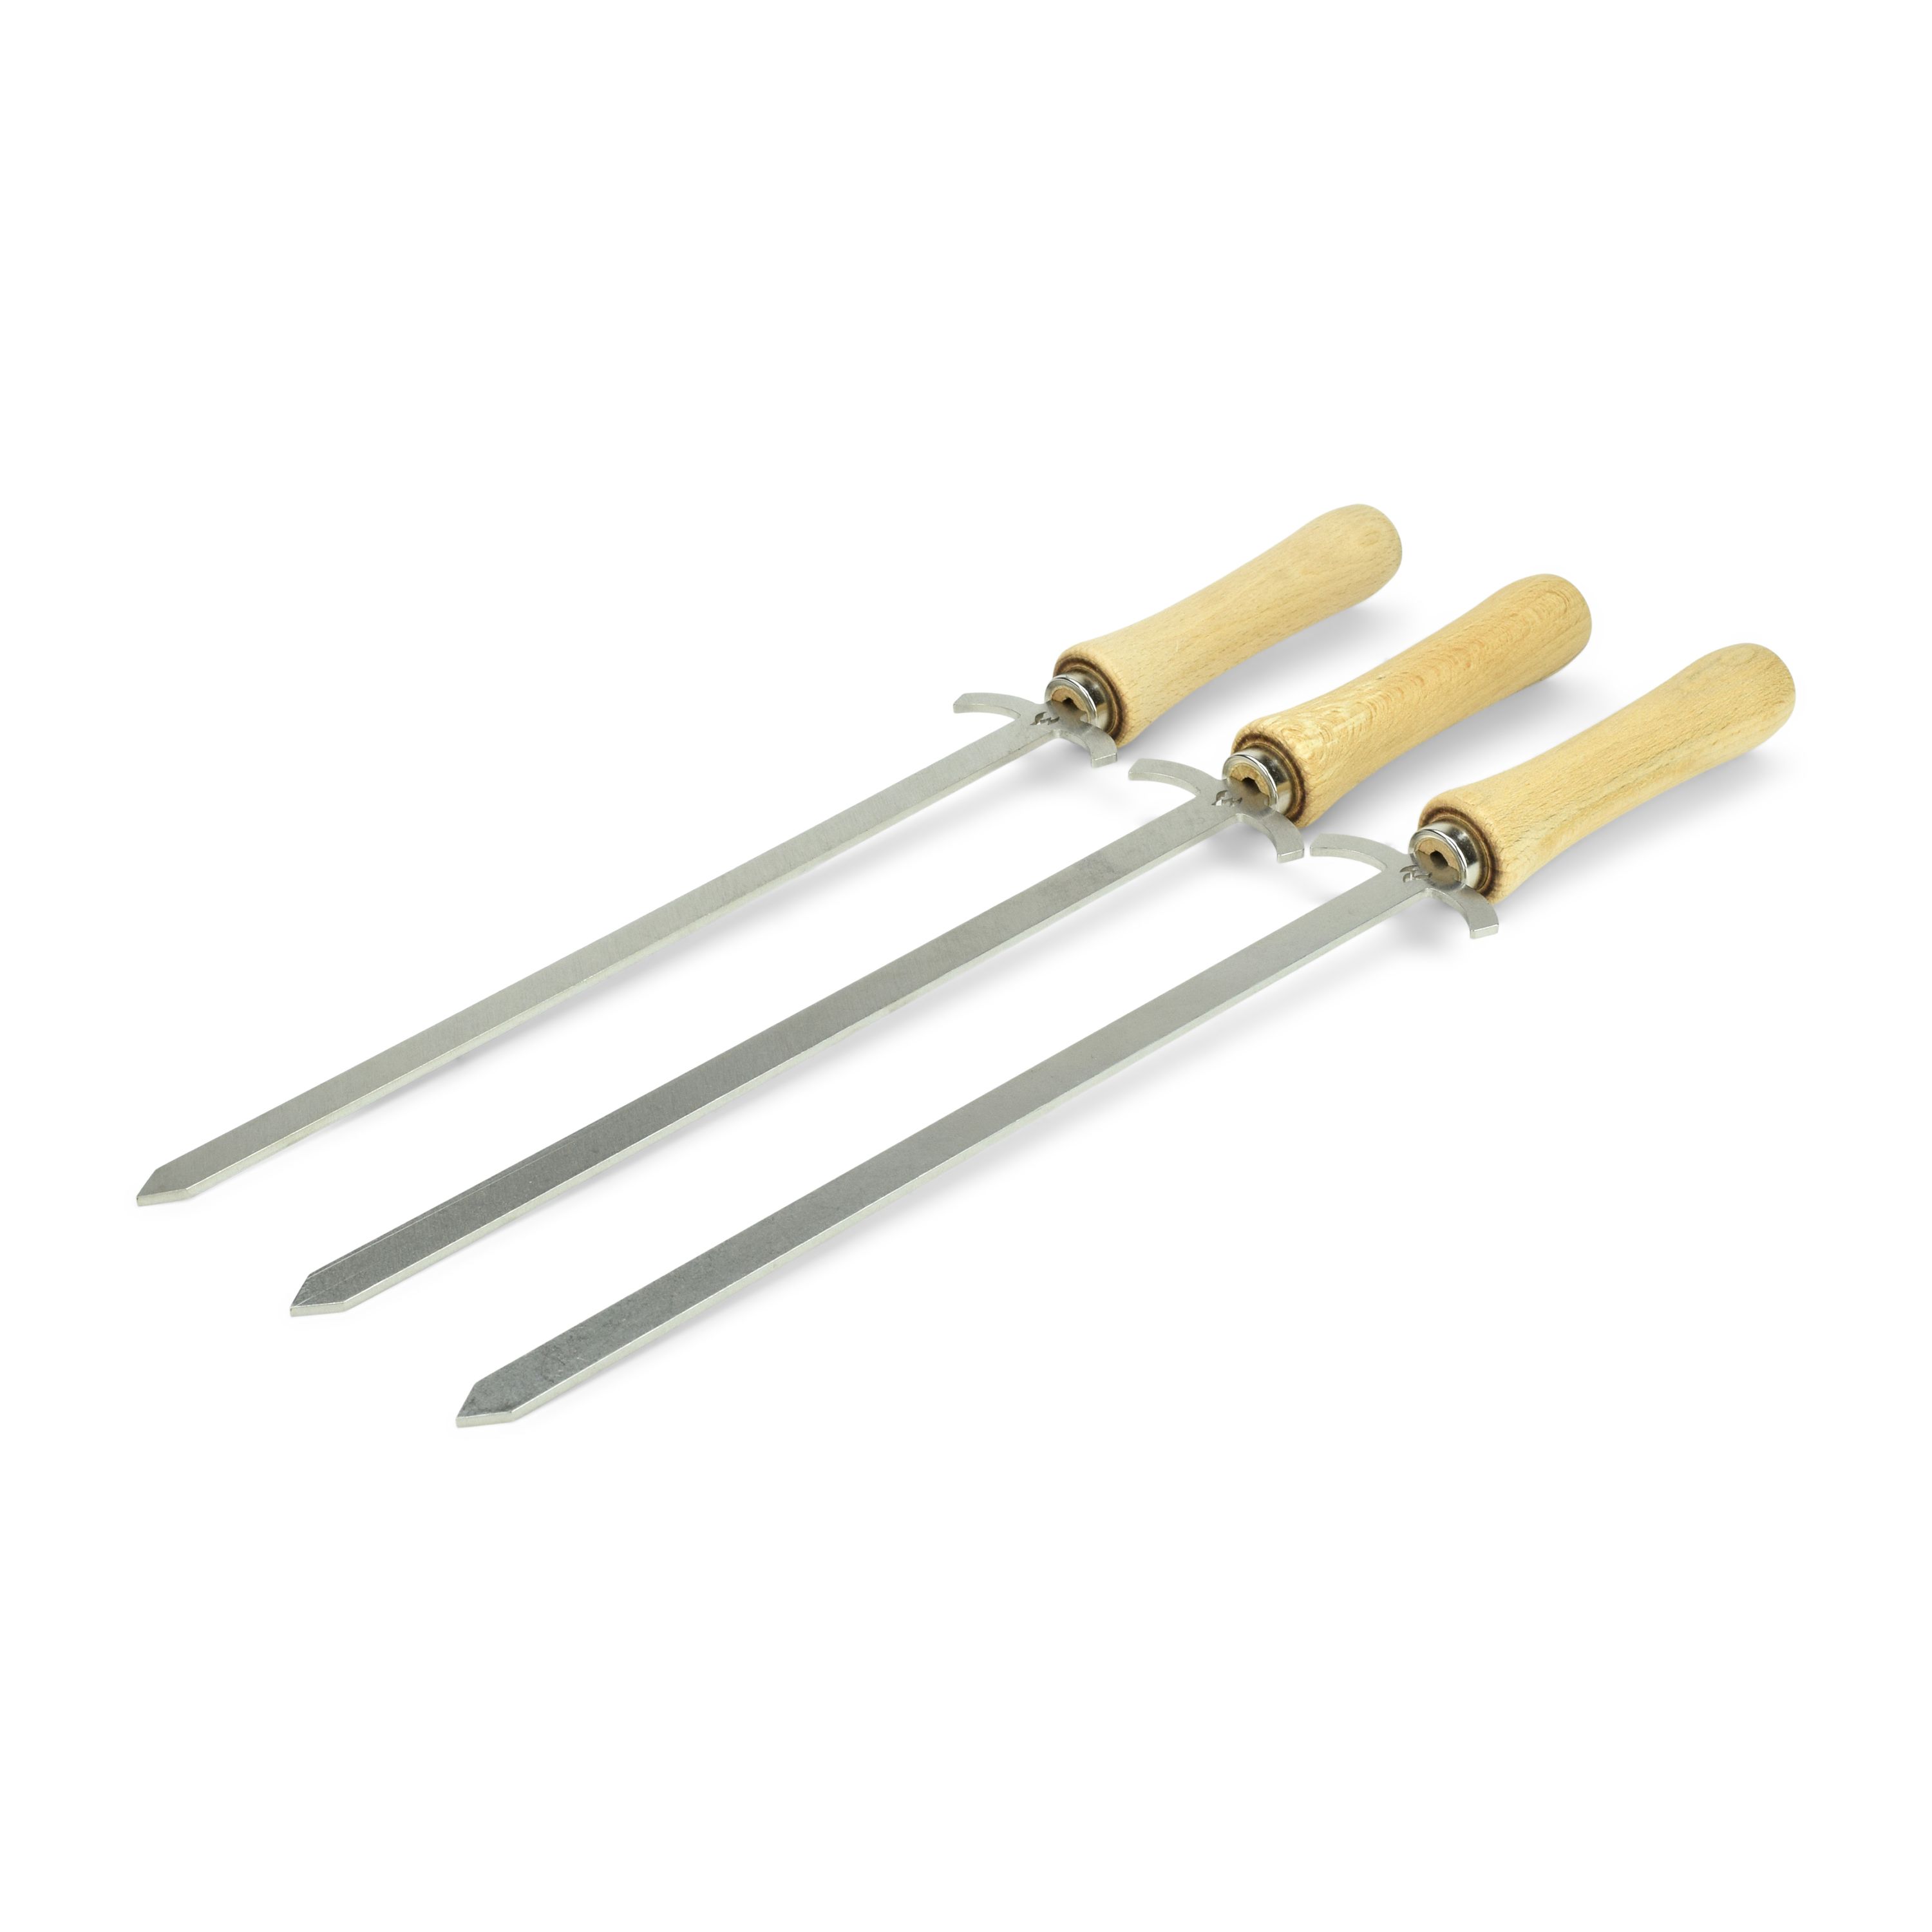 3 stainless steel barbecue swords the somewhat different barbecue skewer - 44 cm long